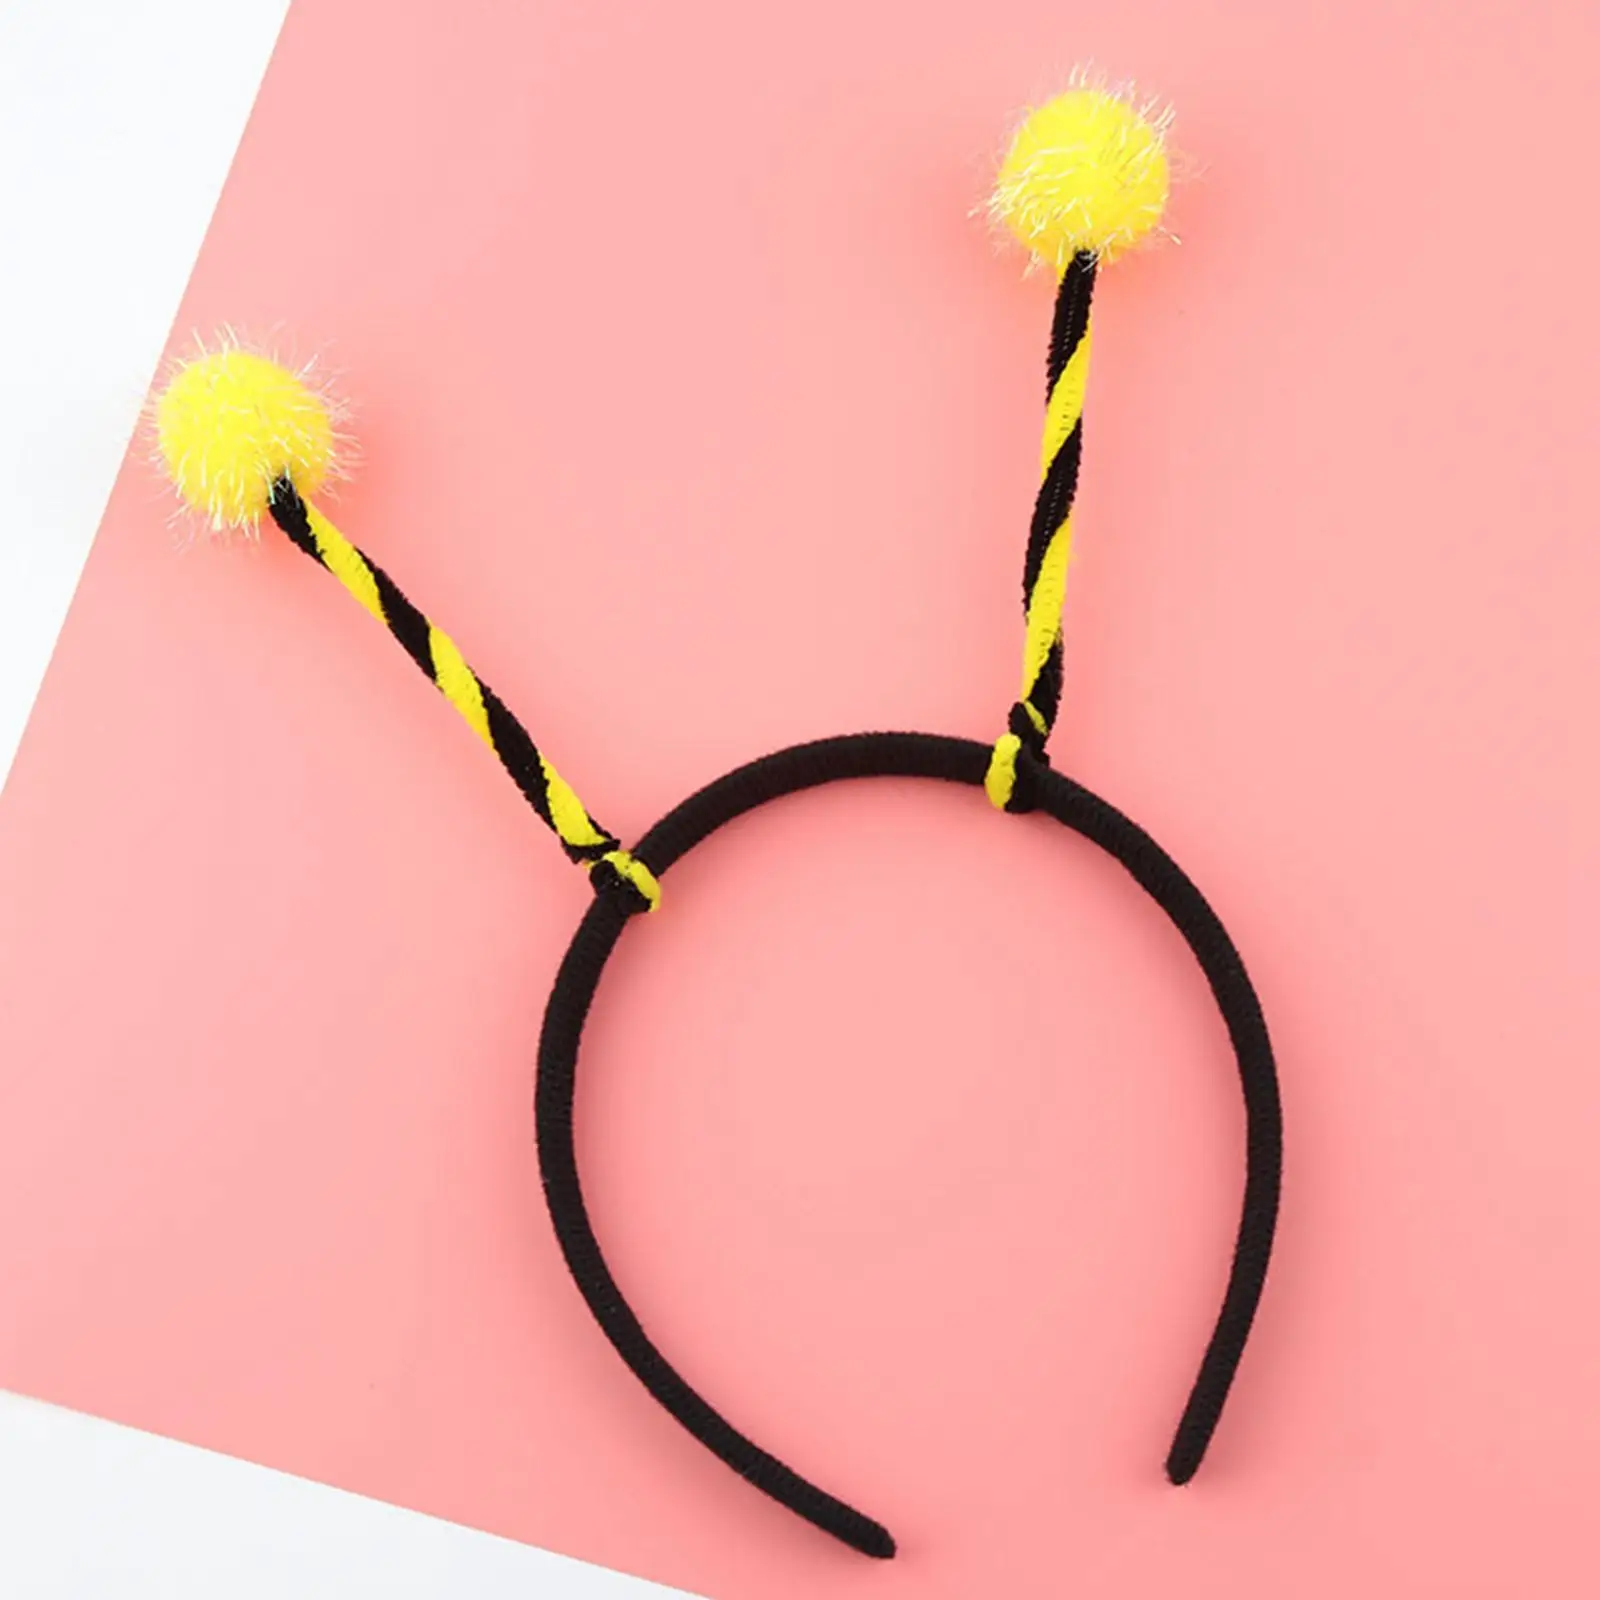 Hair Band Tentacle Decoration Animal Shape Cute Accessory Dress up for Party Supplies Birthday Party Favors Cosplay Adult Women